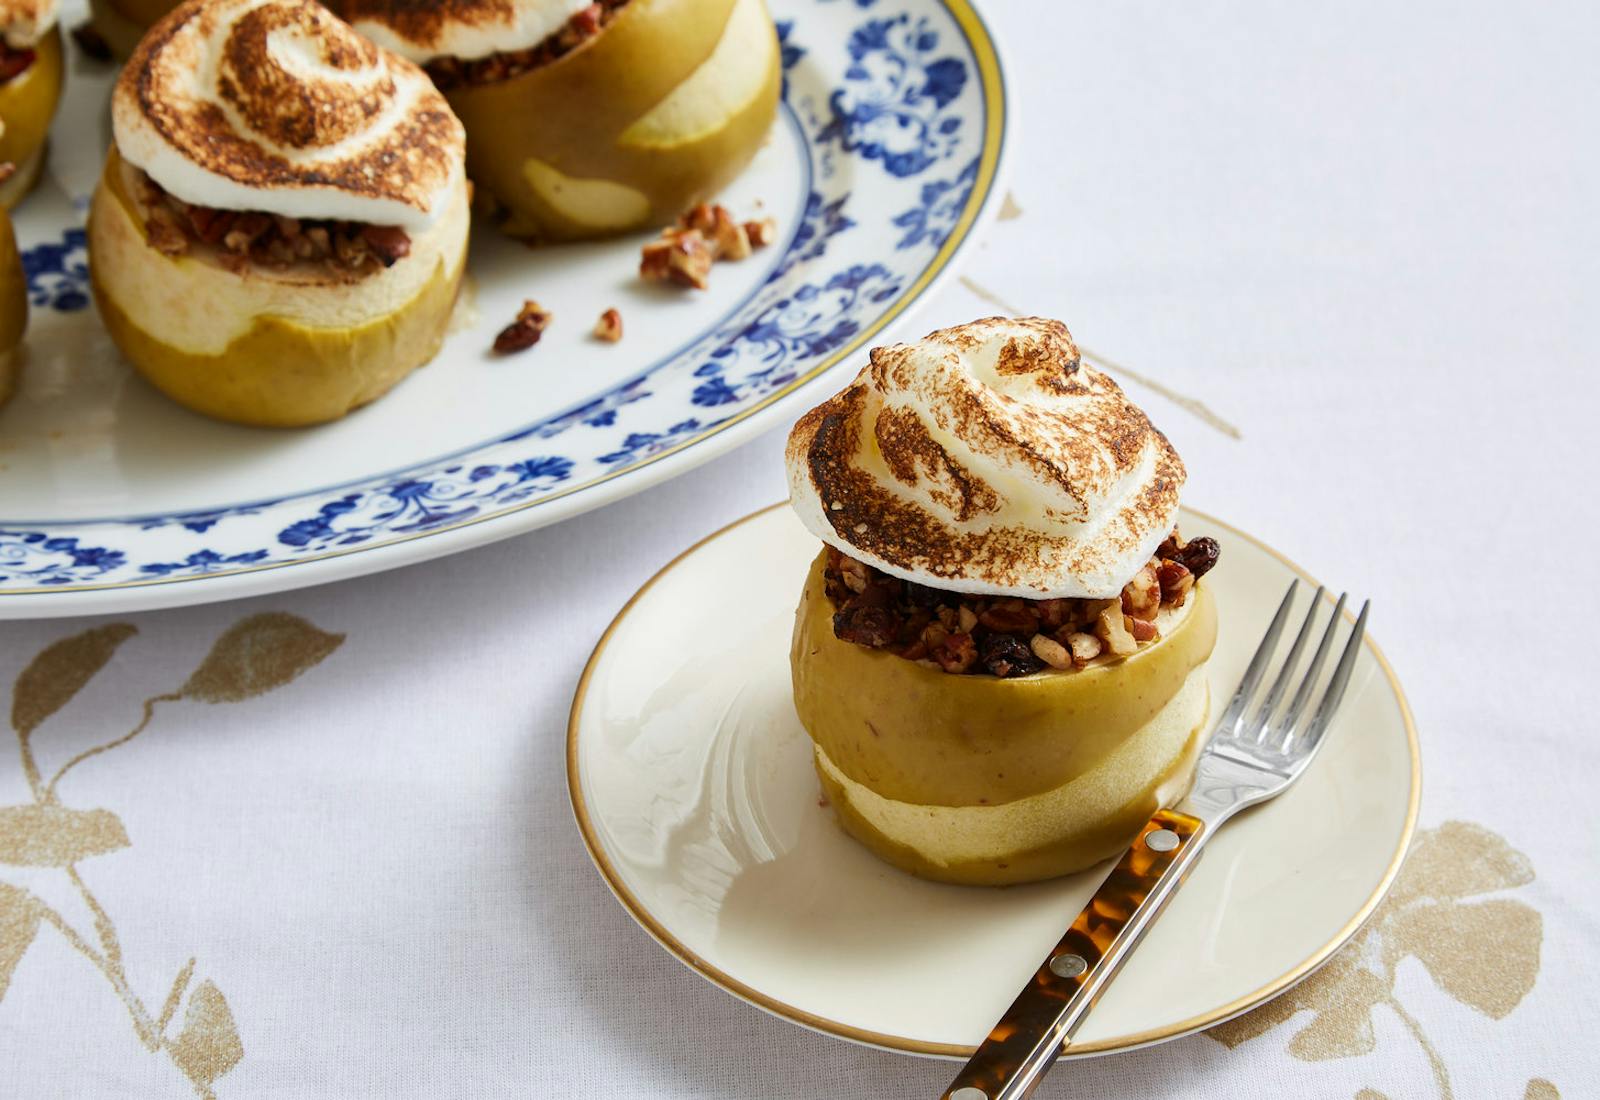 Baked apples with burnished meringue atop gold patterned tablecloth.